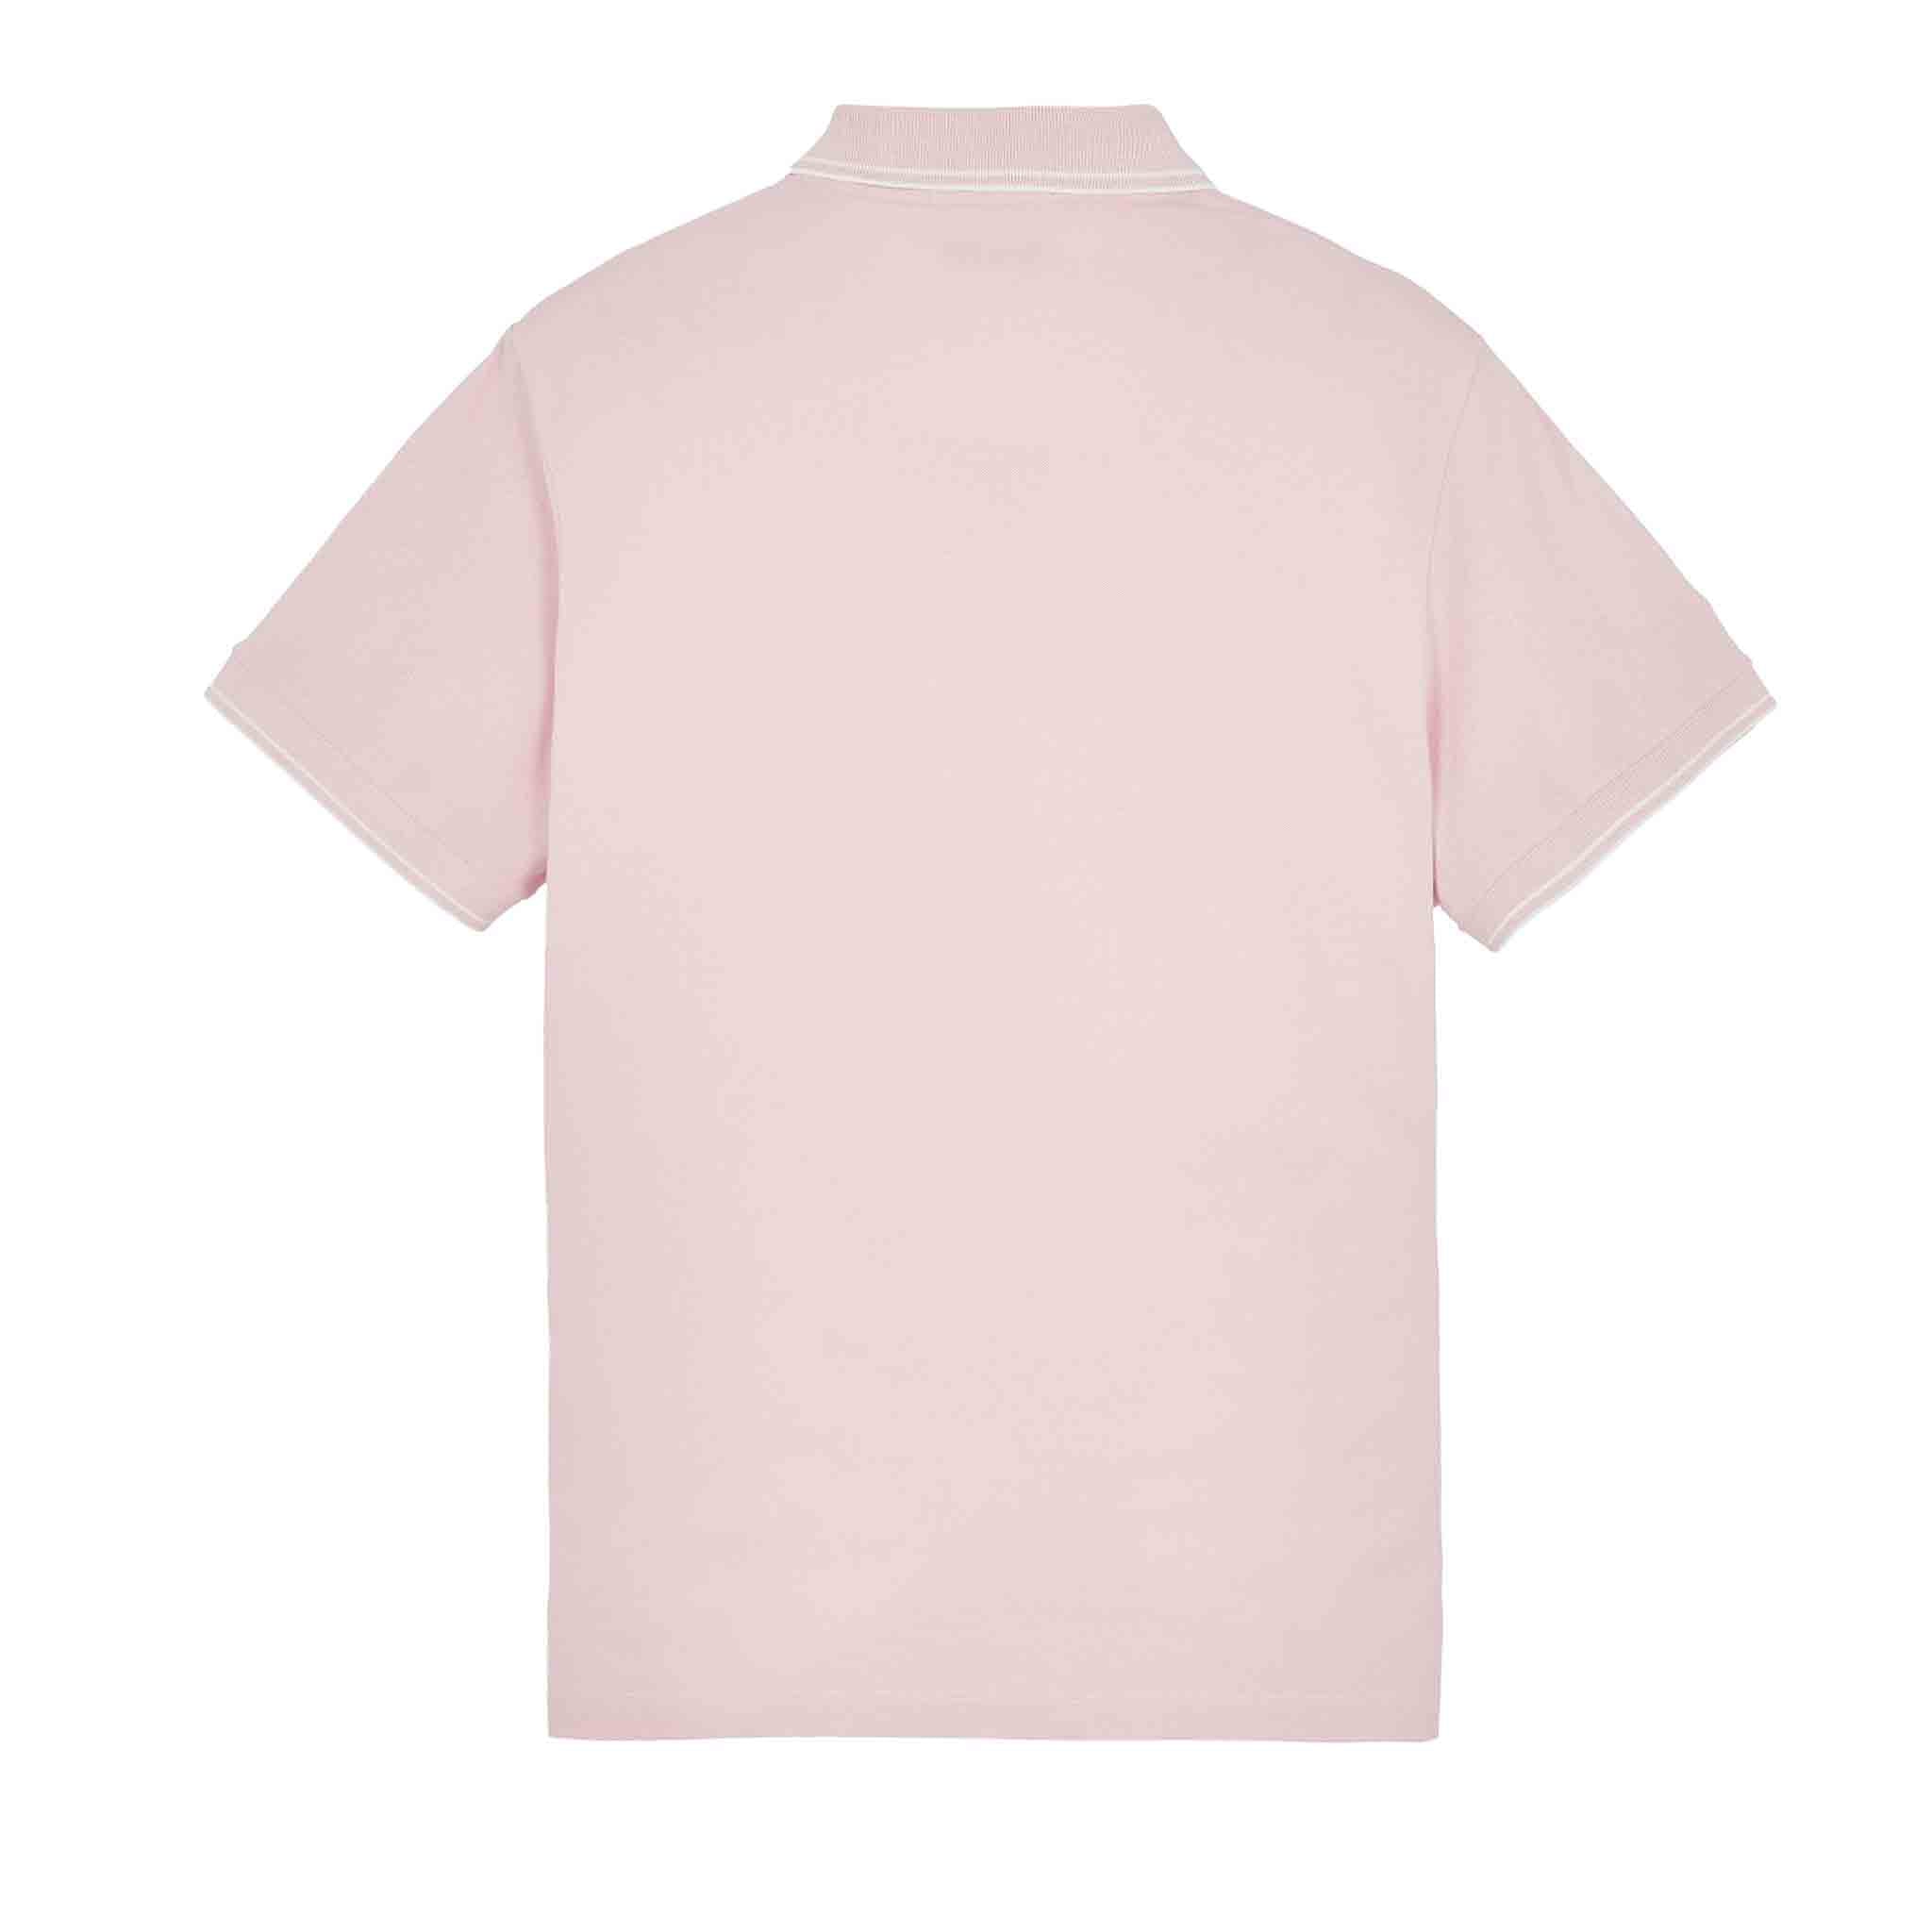 Stone Island Junior Short Sleeve Polo in Pink